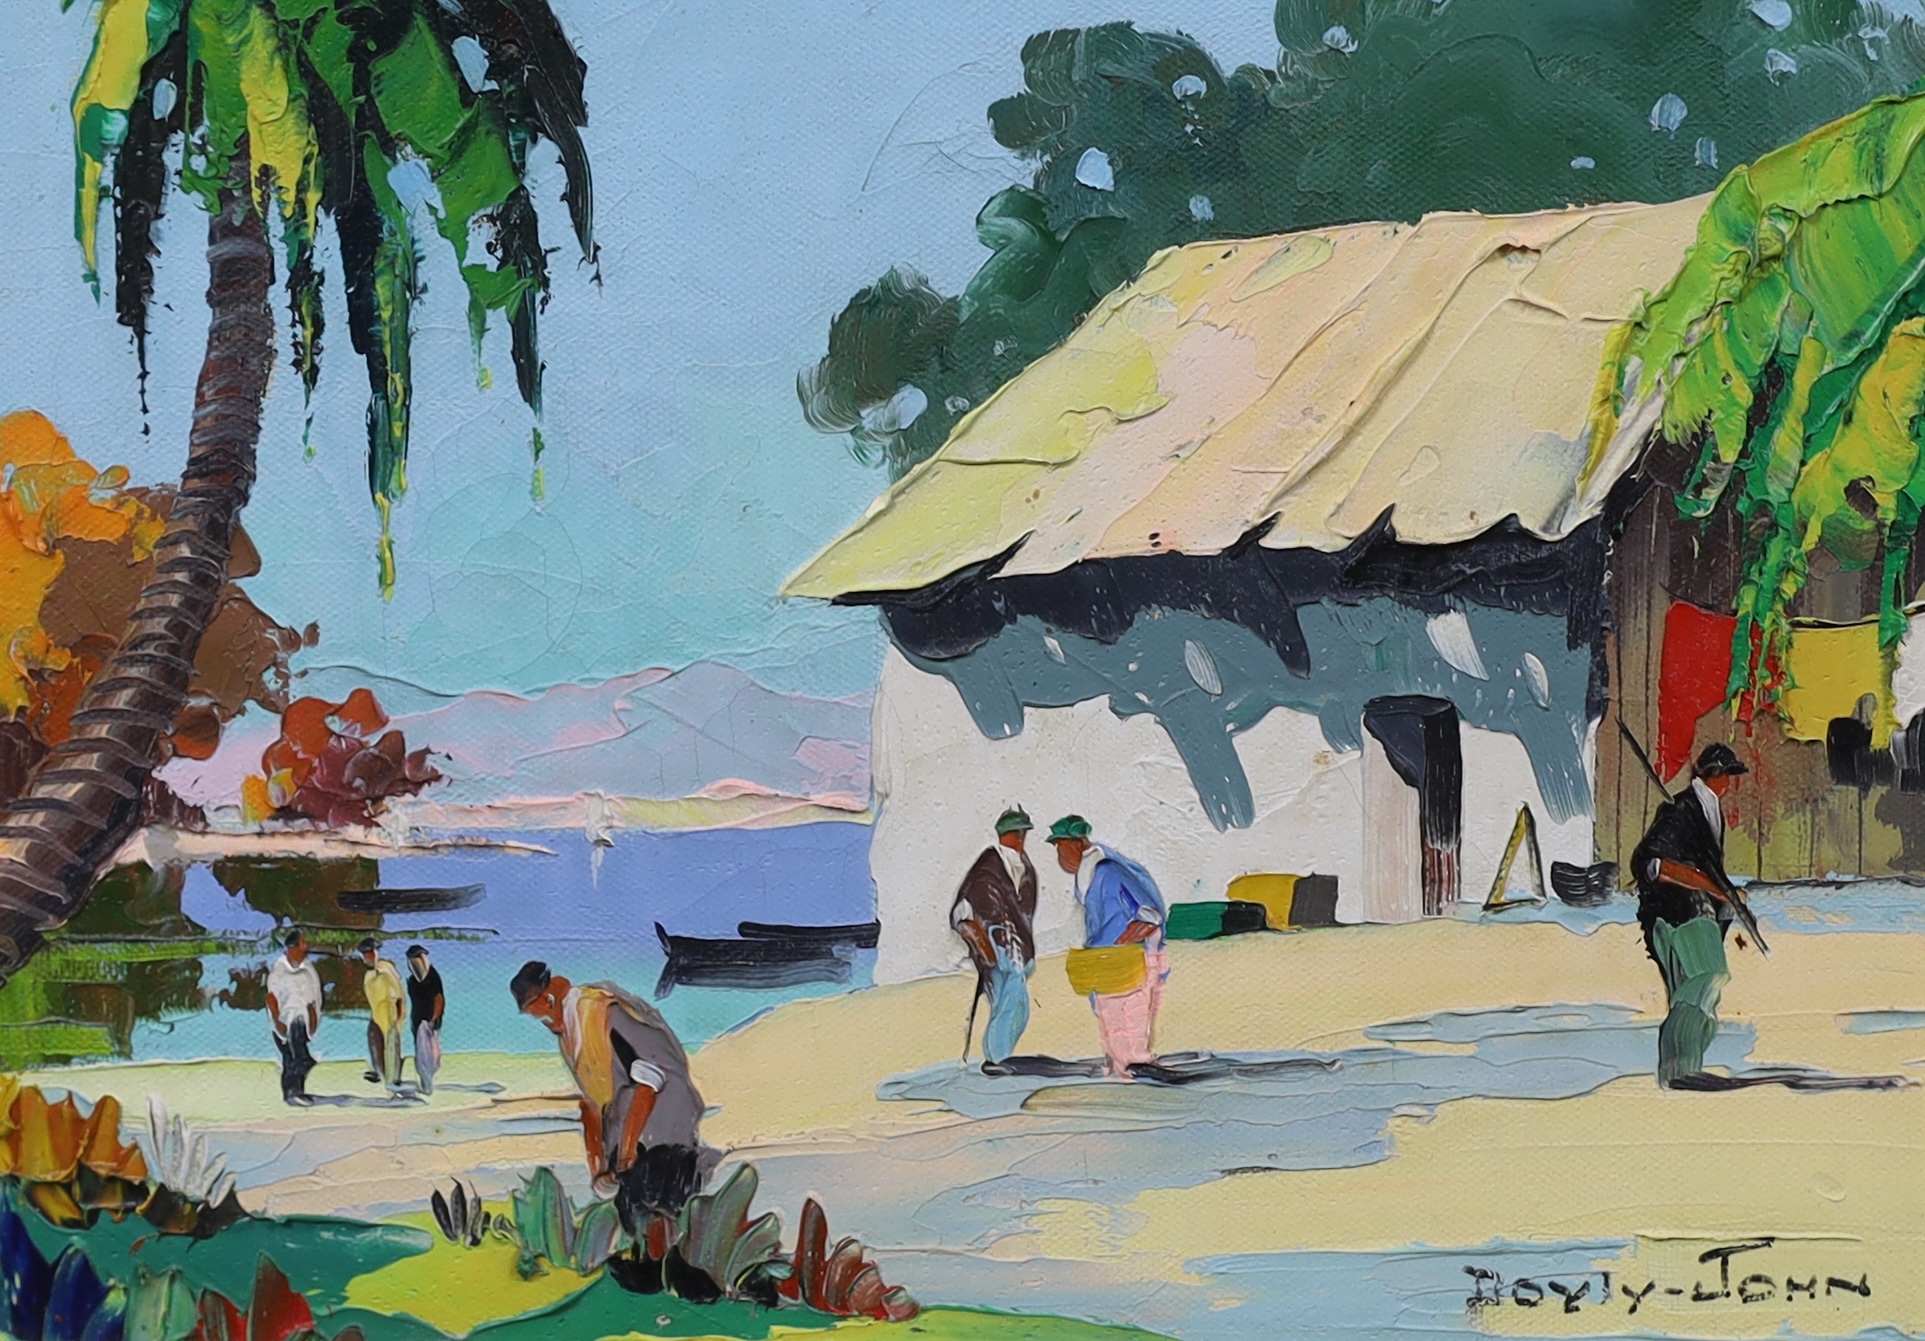 Cecil Rochfort D'Oyly John (English, 1906-1993), Fishing village with figures and palm trees, oil on canvas, 24 x 34cm